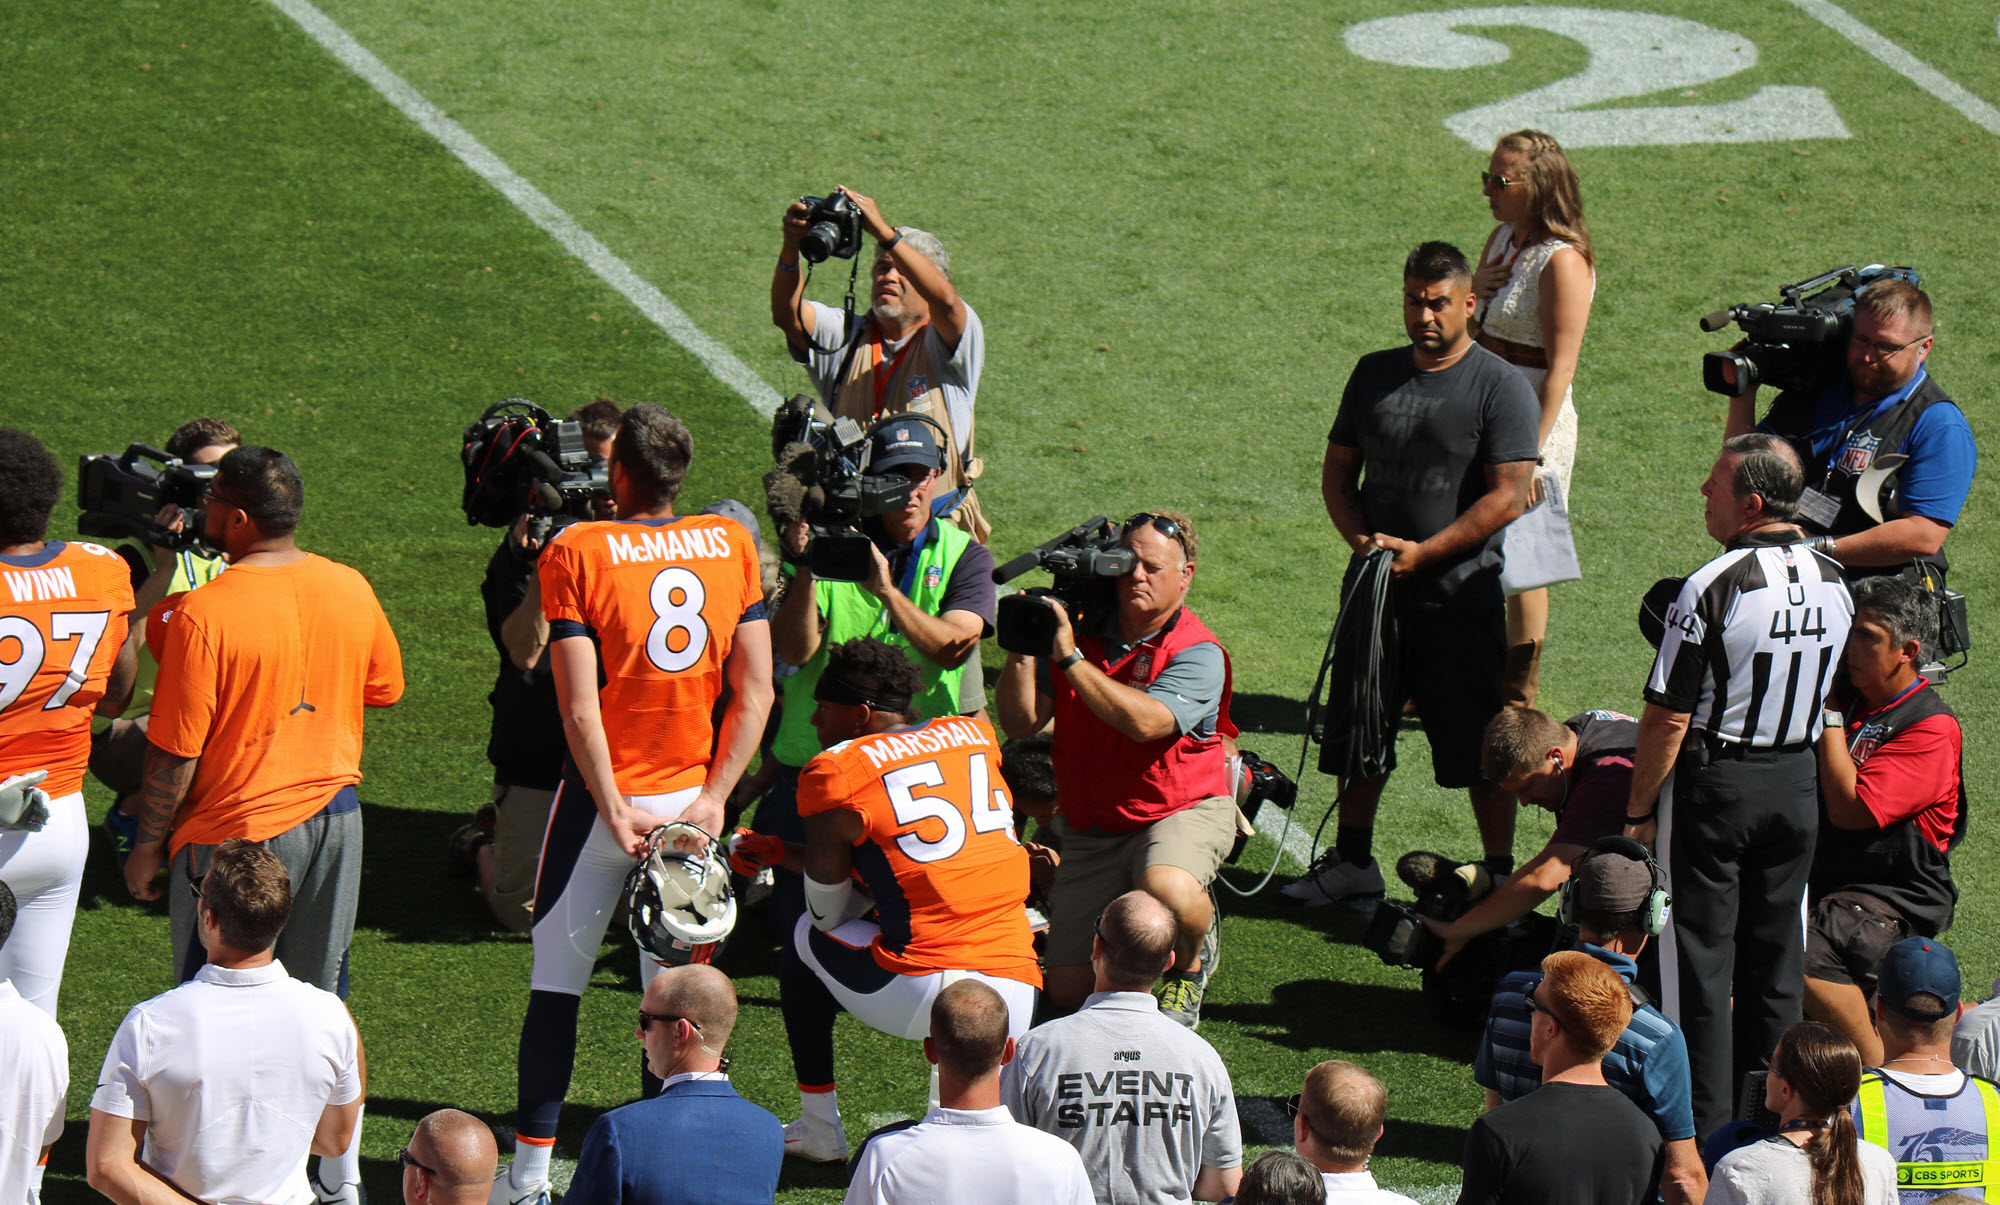 Brandon Marshall, a linebacker for the Denver Broncos American football team, kneeling in protest during the singing of the Star-Spangled Banner at a game in 2016. / Photo by Jeffrey Beall on Wikimedia Commons. Used under CC 4.0.